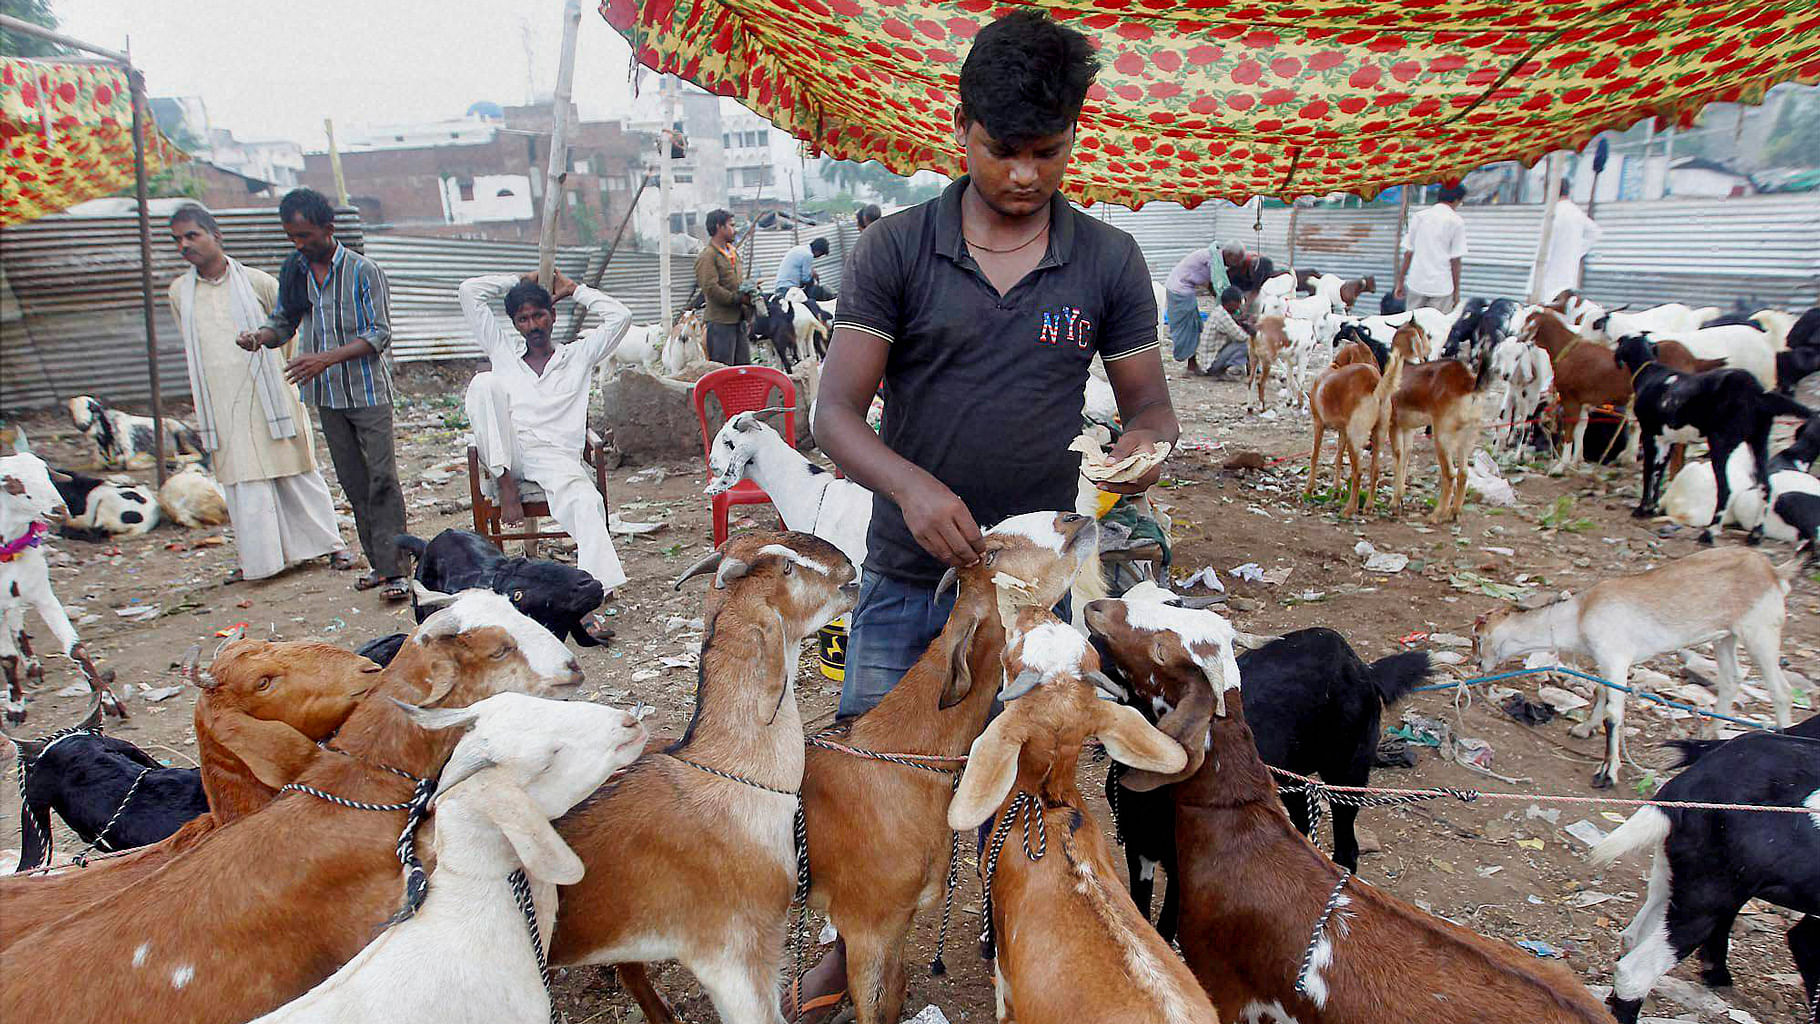 A trader feeds goats ahead of the Eid al-Adha festival, in Allahabad on Monday.